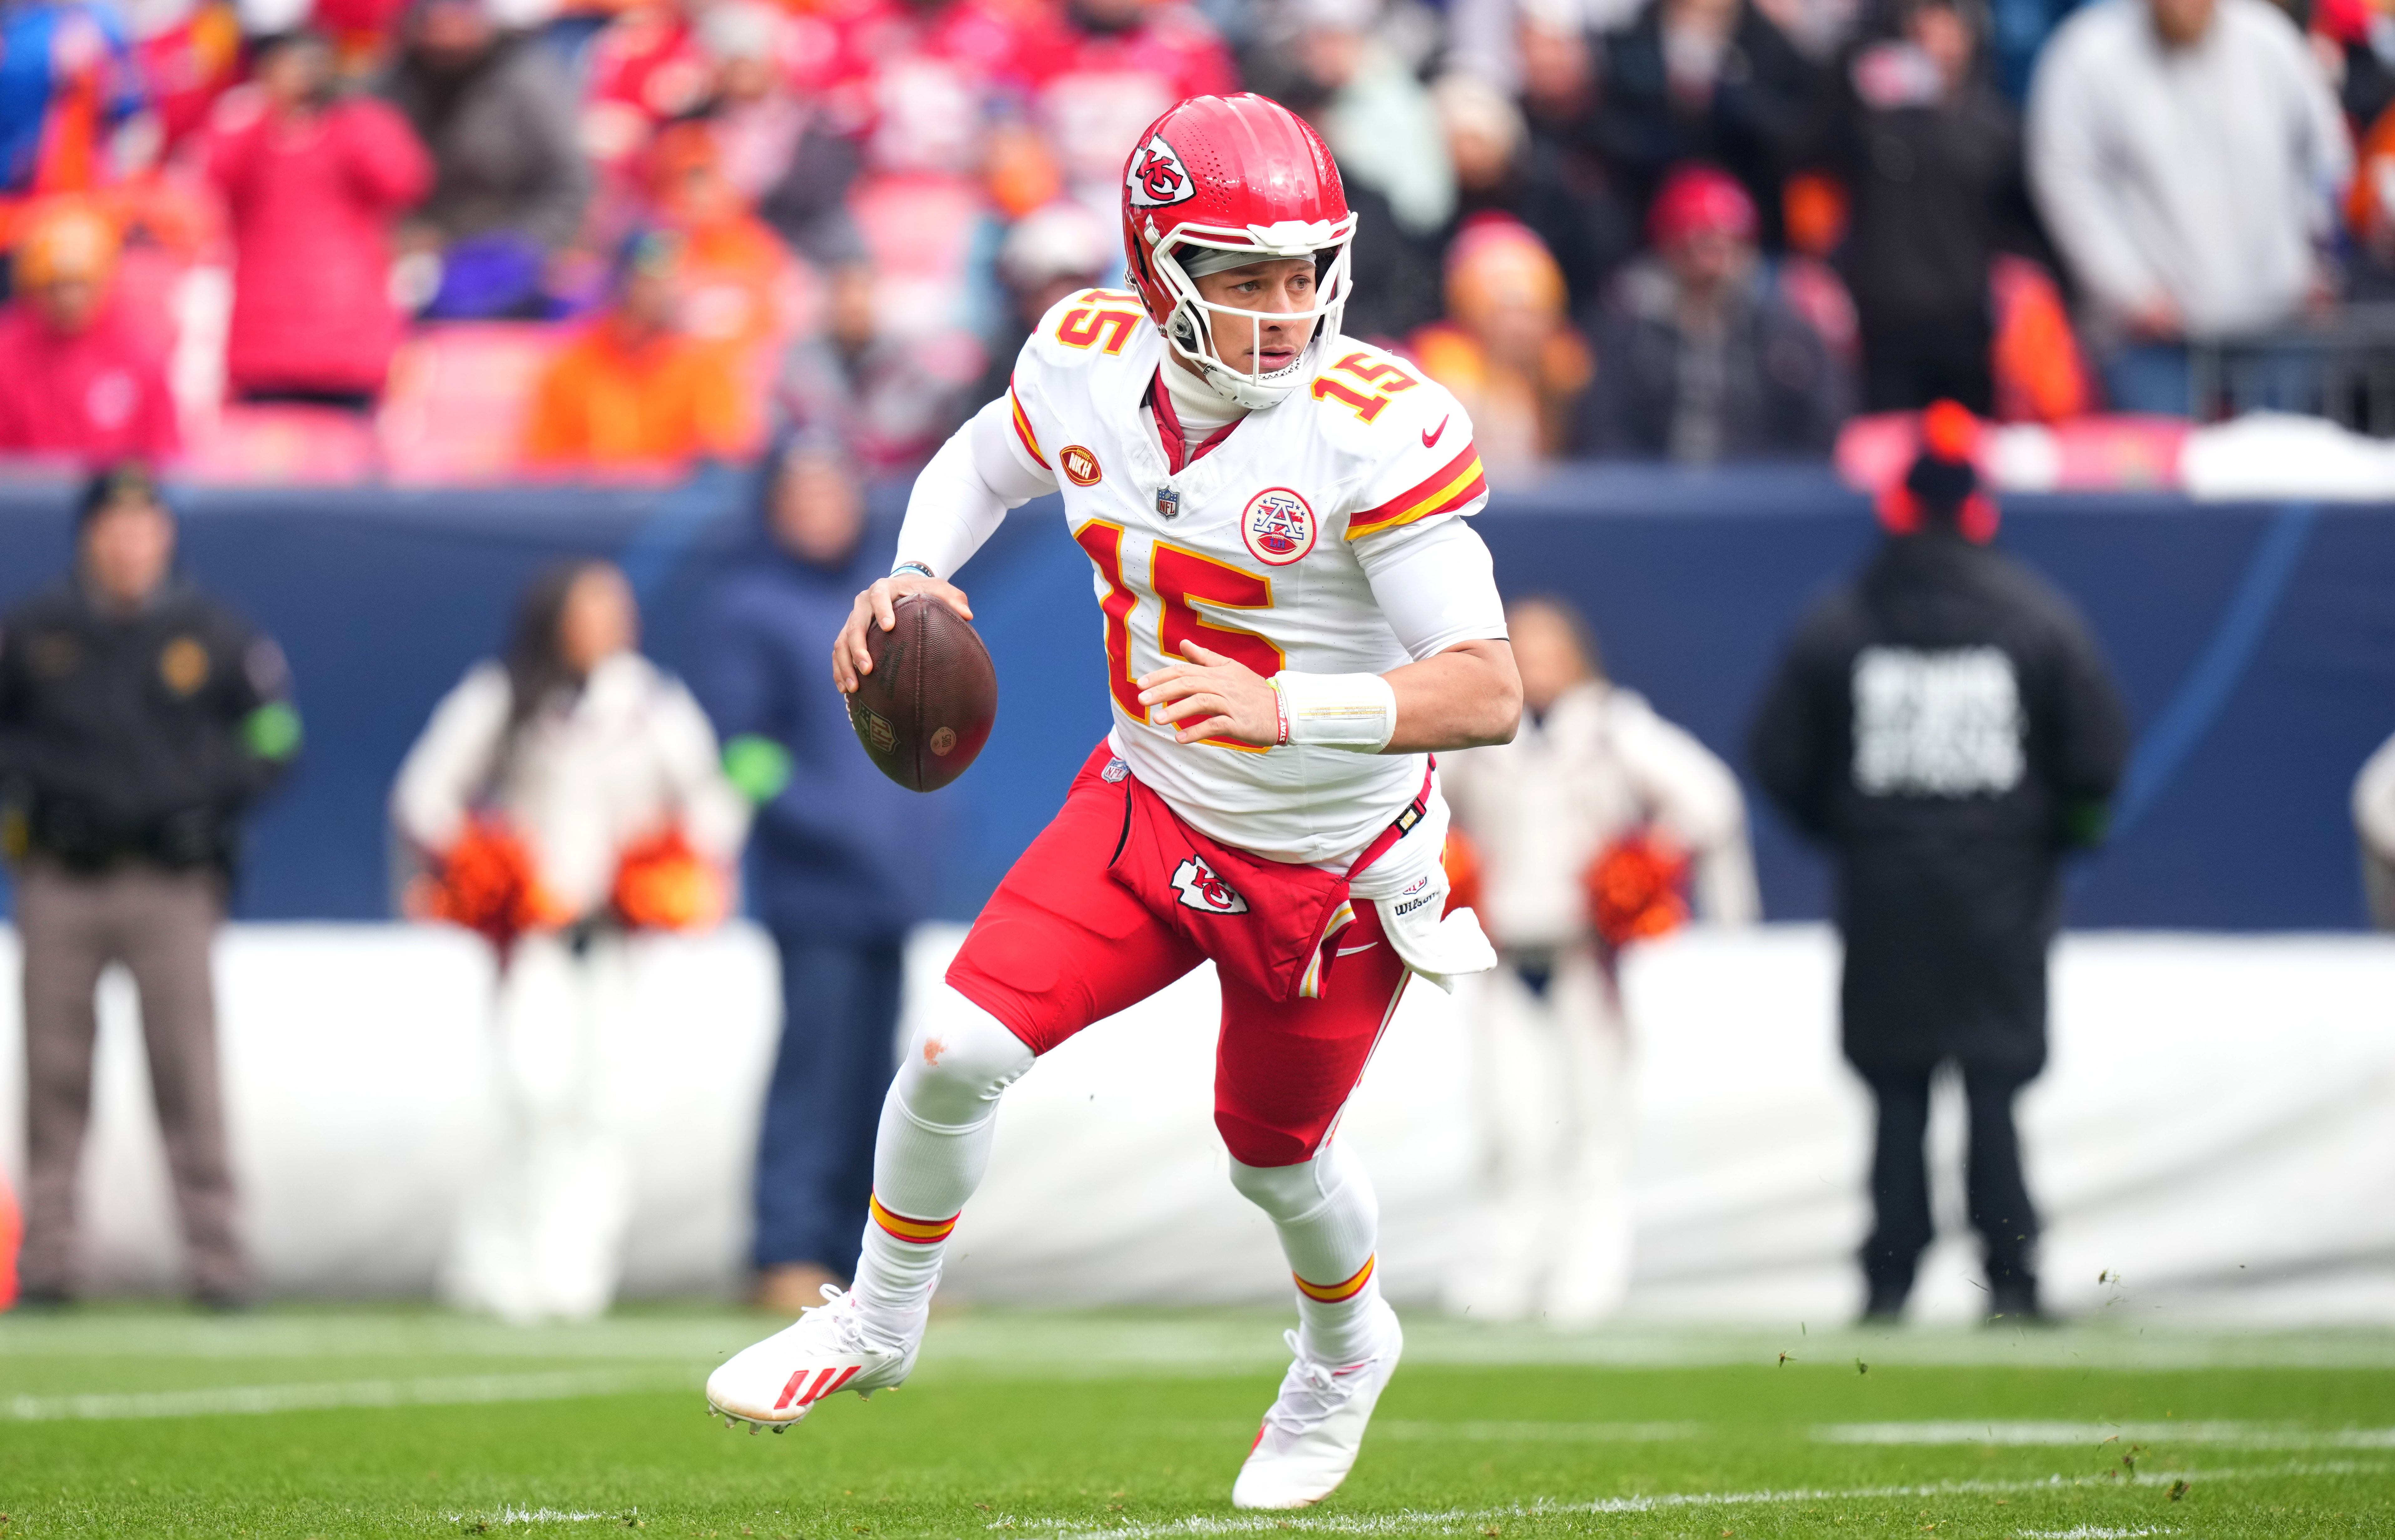 Patrick Mahomes runs with the ball in one hand